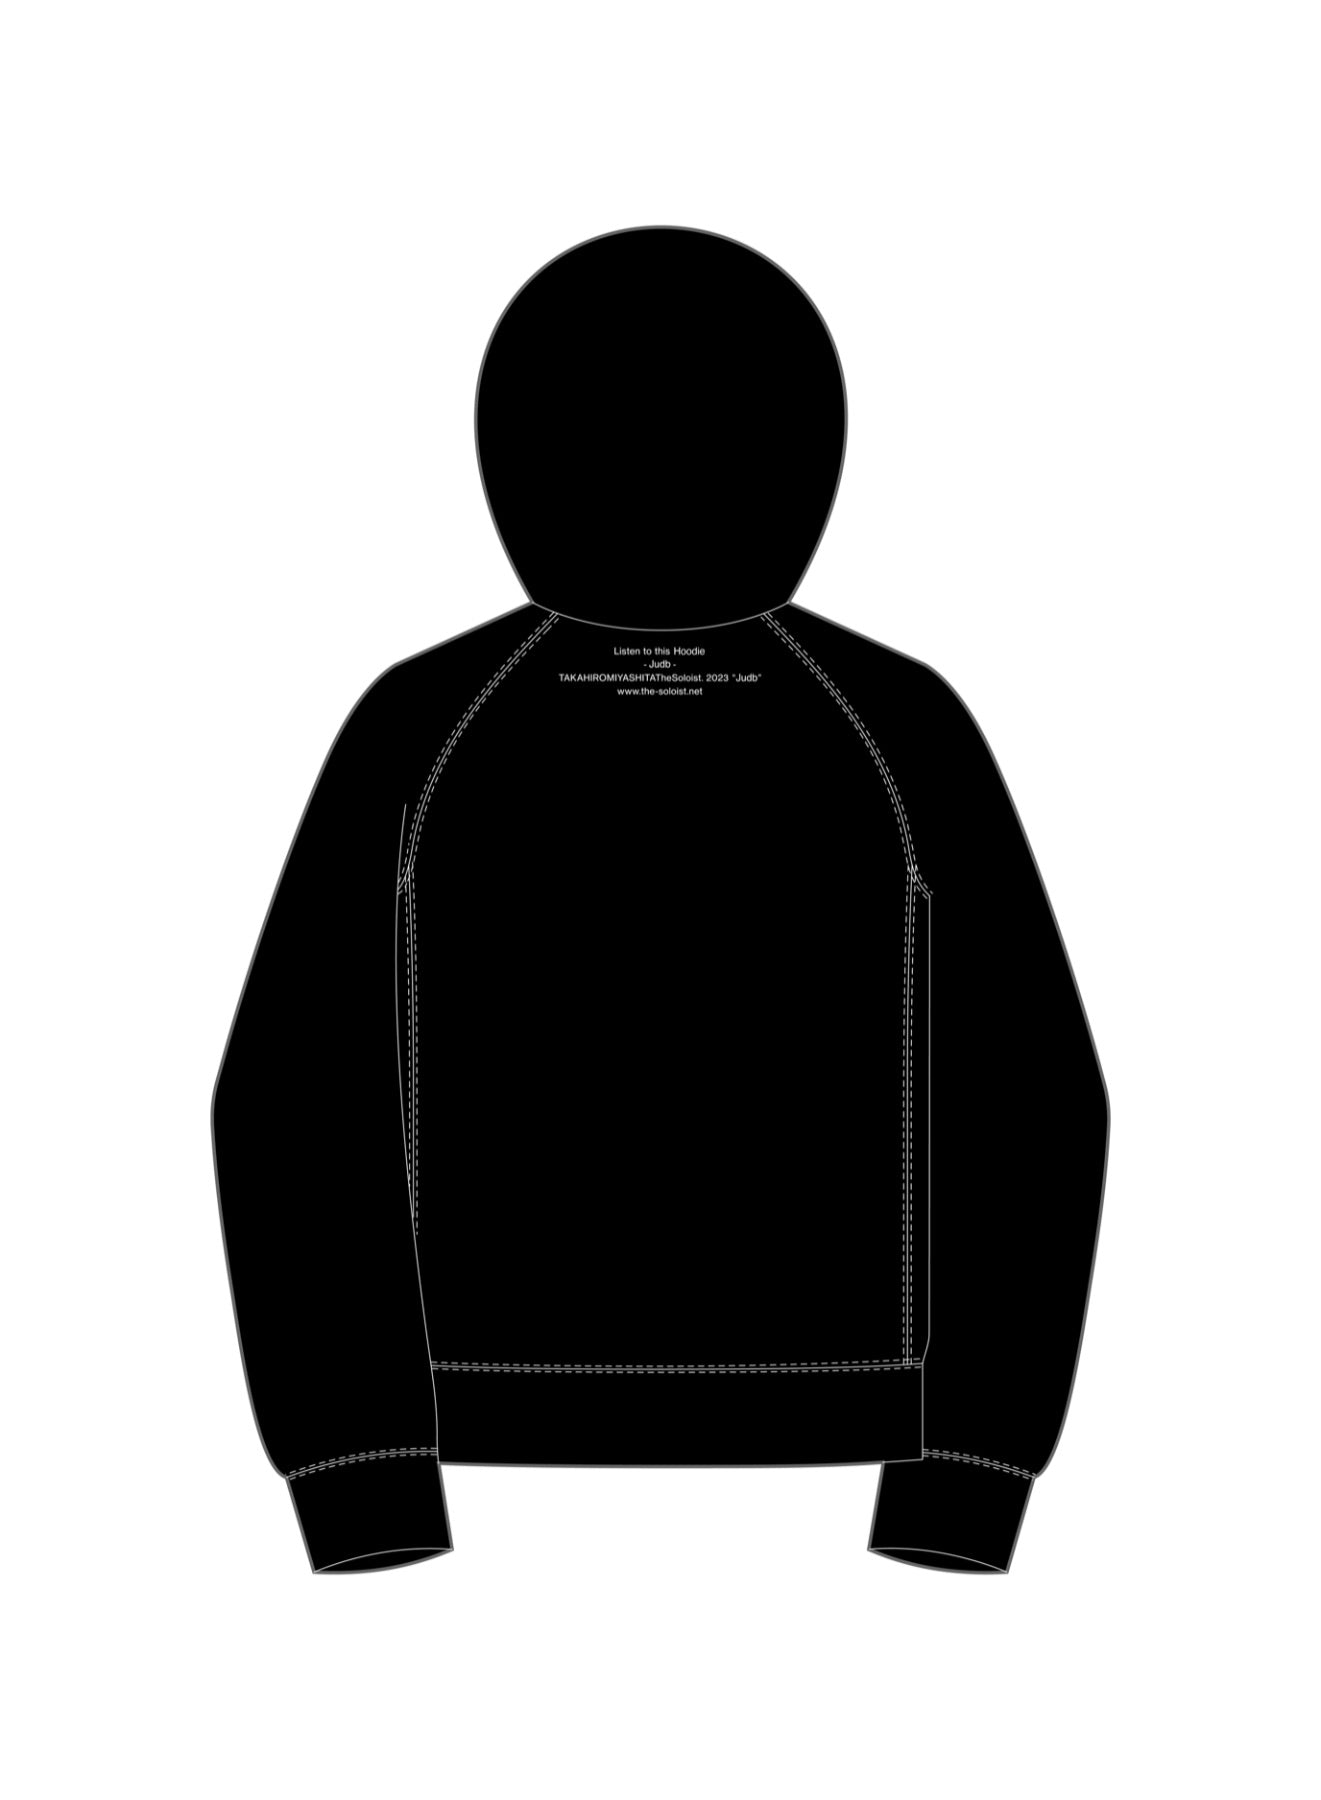 judb.(over sized hoodie)